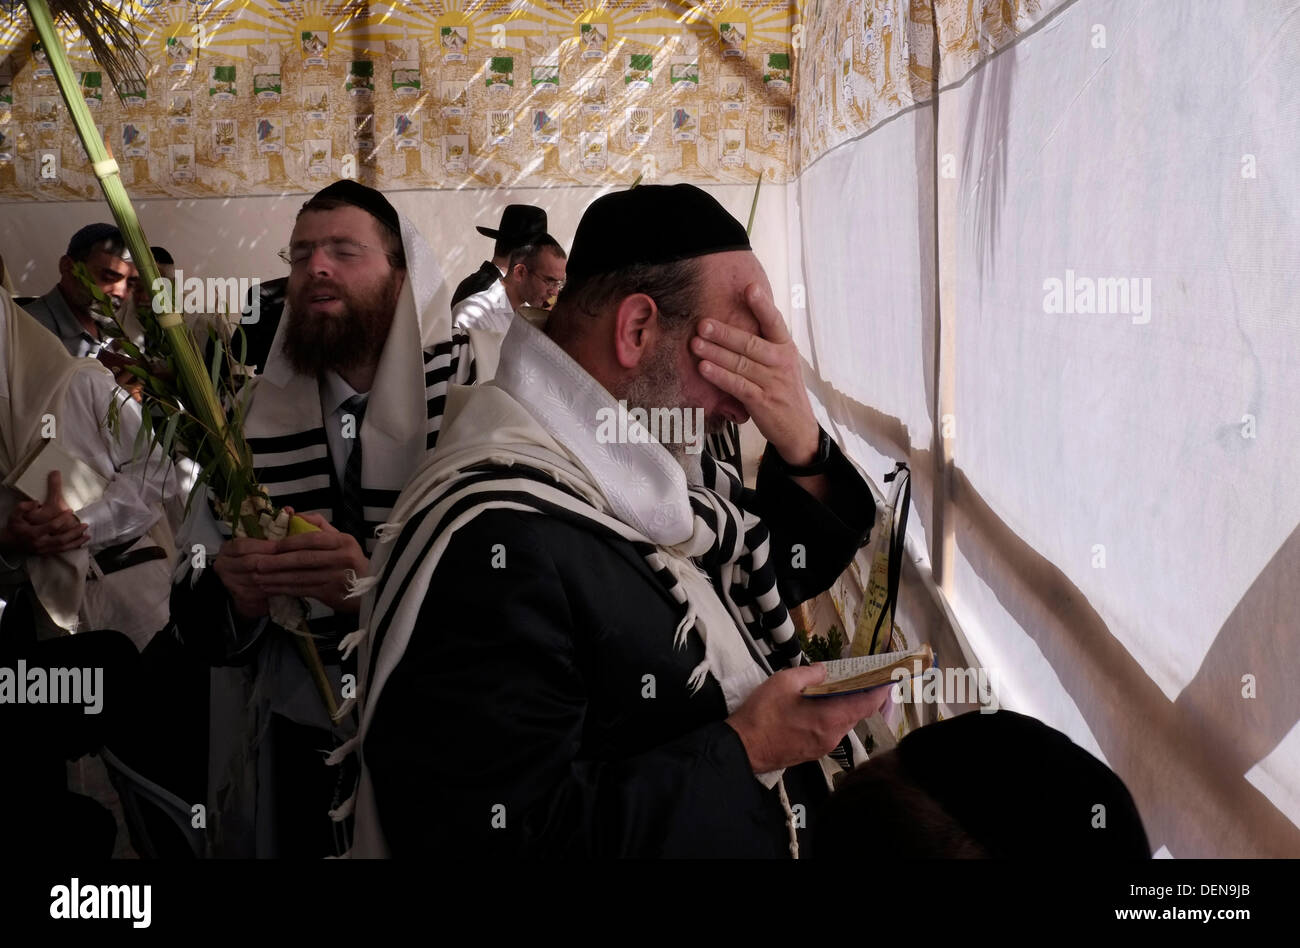 Orthodox Jewish worshipers holding ceremonial palm fronds and willows on Sukkot feast inside a traditional Sukkah booth at the Western Wall in East Jerusalem on 22 September 2013. Tens of thousands of worshippers crowded the Kotel (Western Wall) plaza for morning prayers, the fifth day of the festival of Sukkot. The service saw thousands of kohanim - members of the priestly families of Israel - bless the gathered crowd in a show of unity and celebration.  Photographer: Eddie Gerald/Alamy Live News Stock Photo